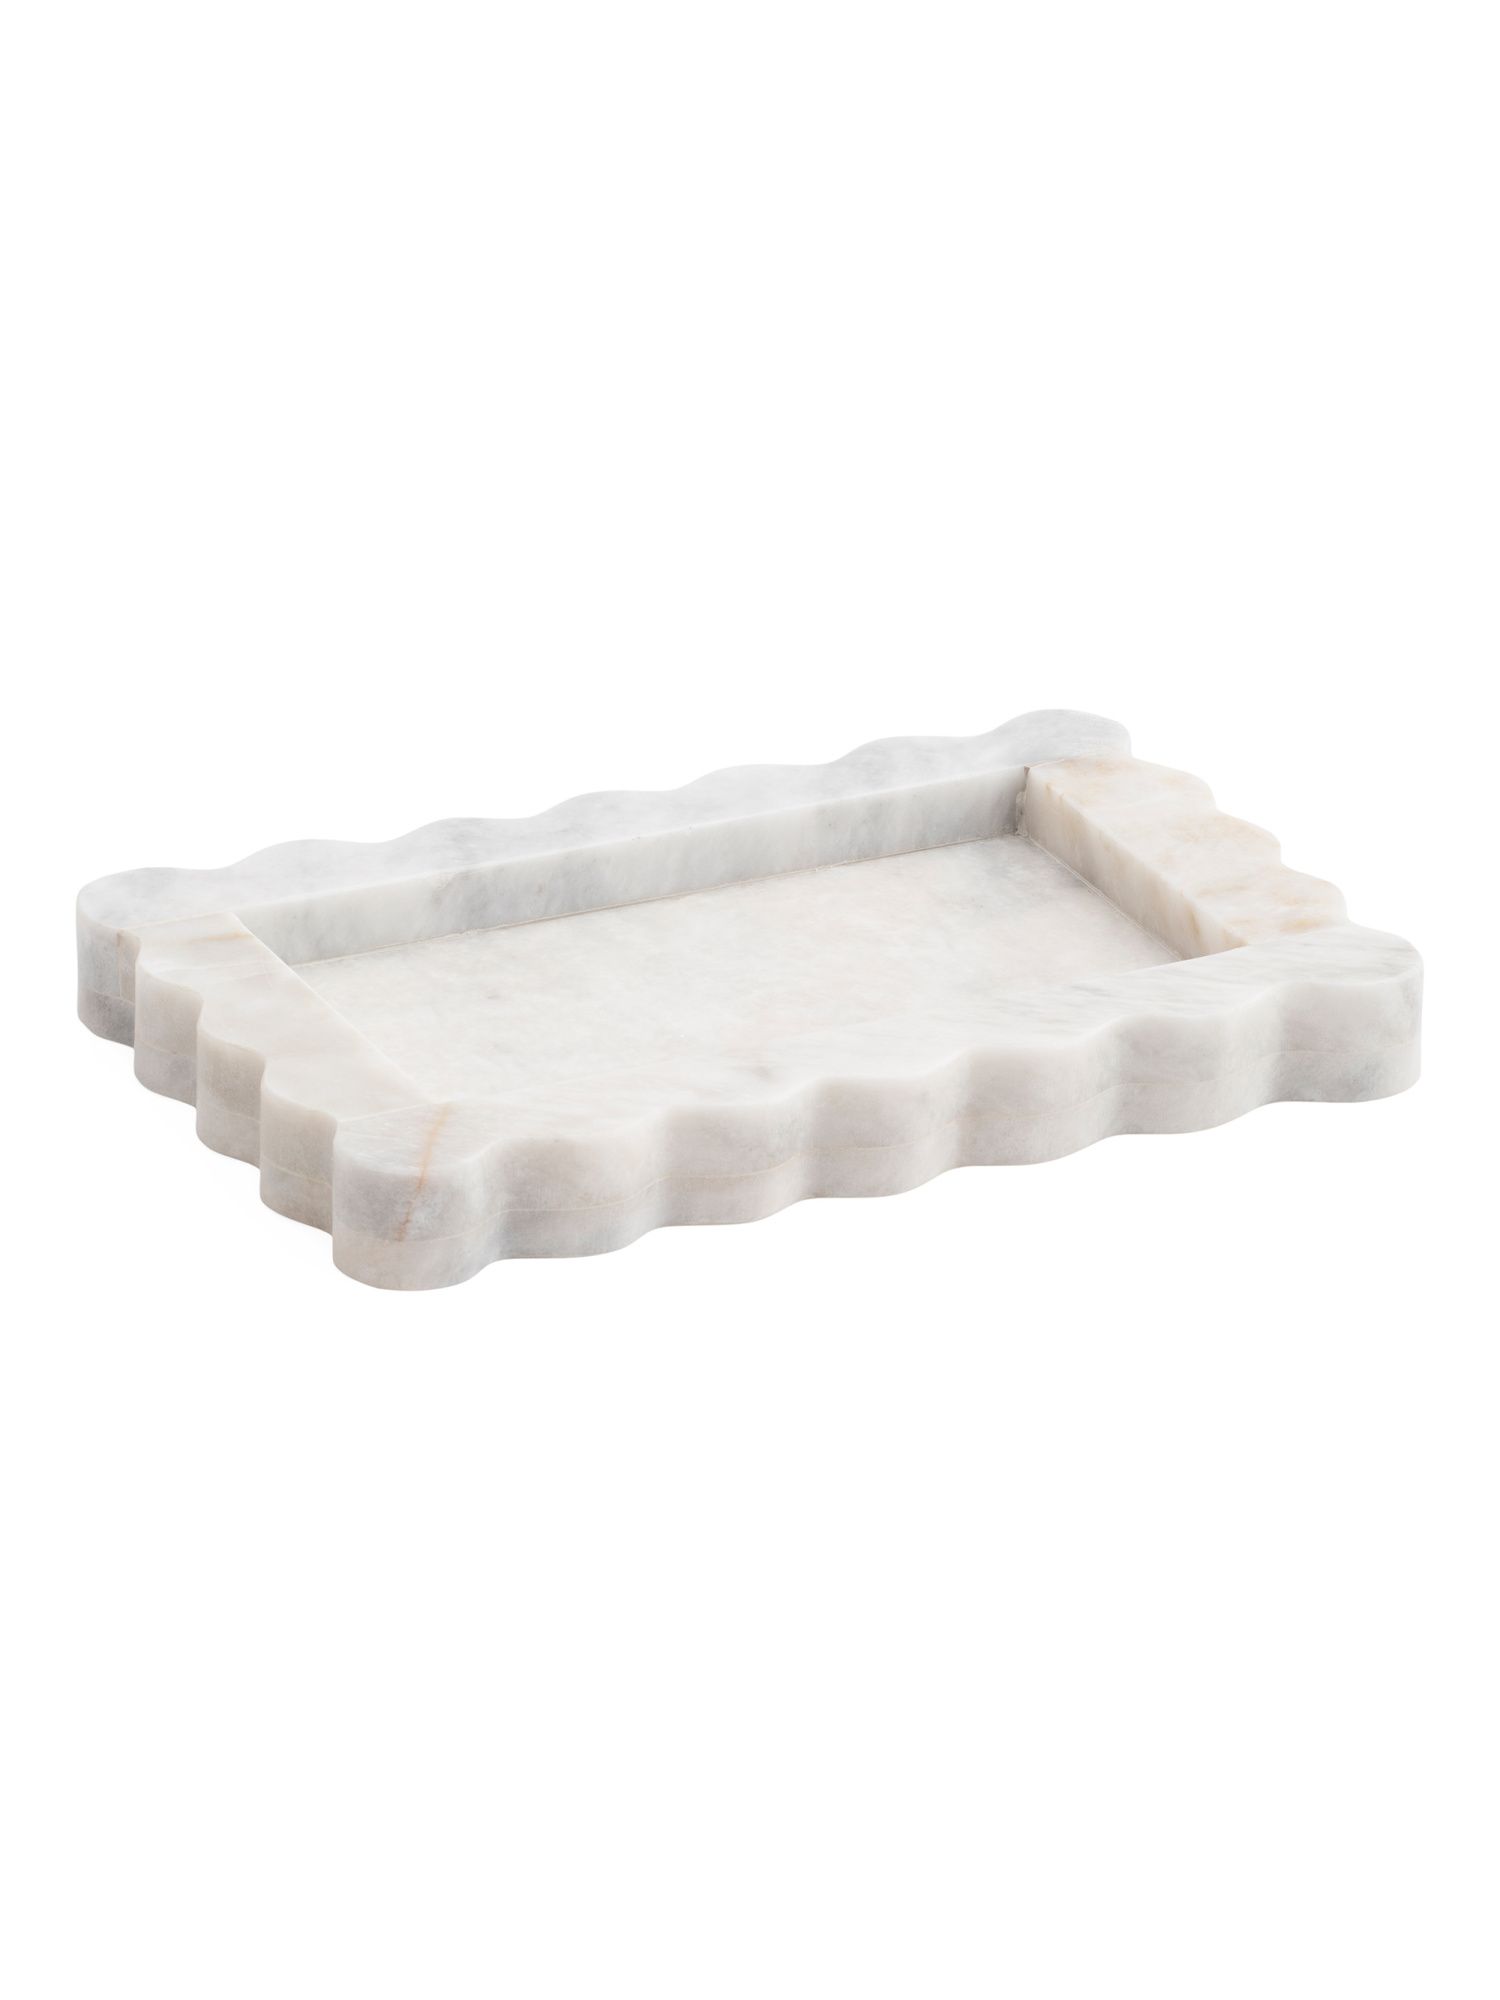 12x8 Fluted Solid Marble Tray | TJ Maxx